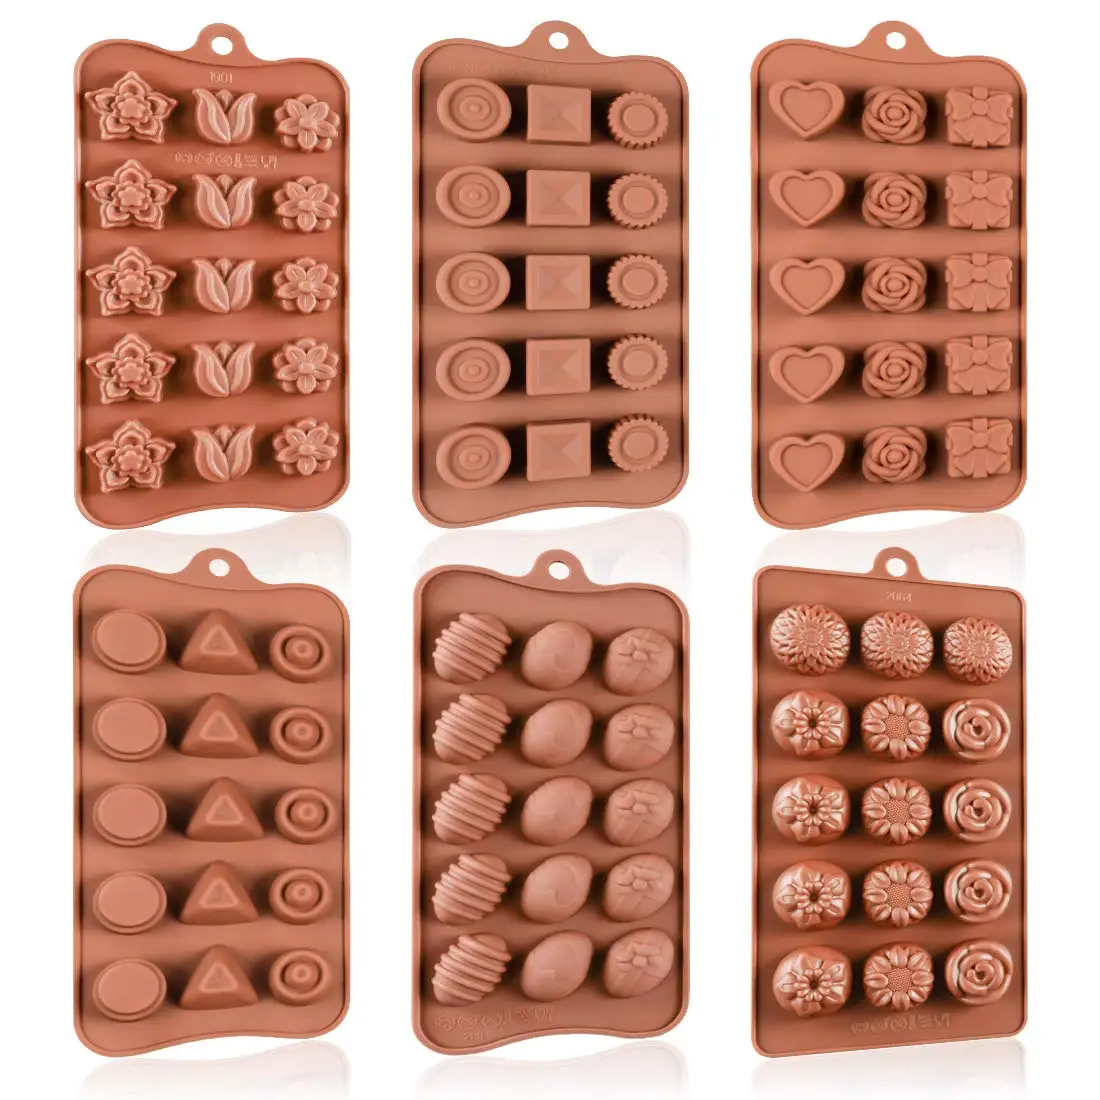 

15 Cavity Rose Flower Shaped Silicone Chocolate Mold Candy Jelly Soap Mold Baking mould